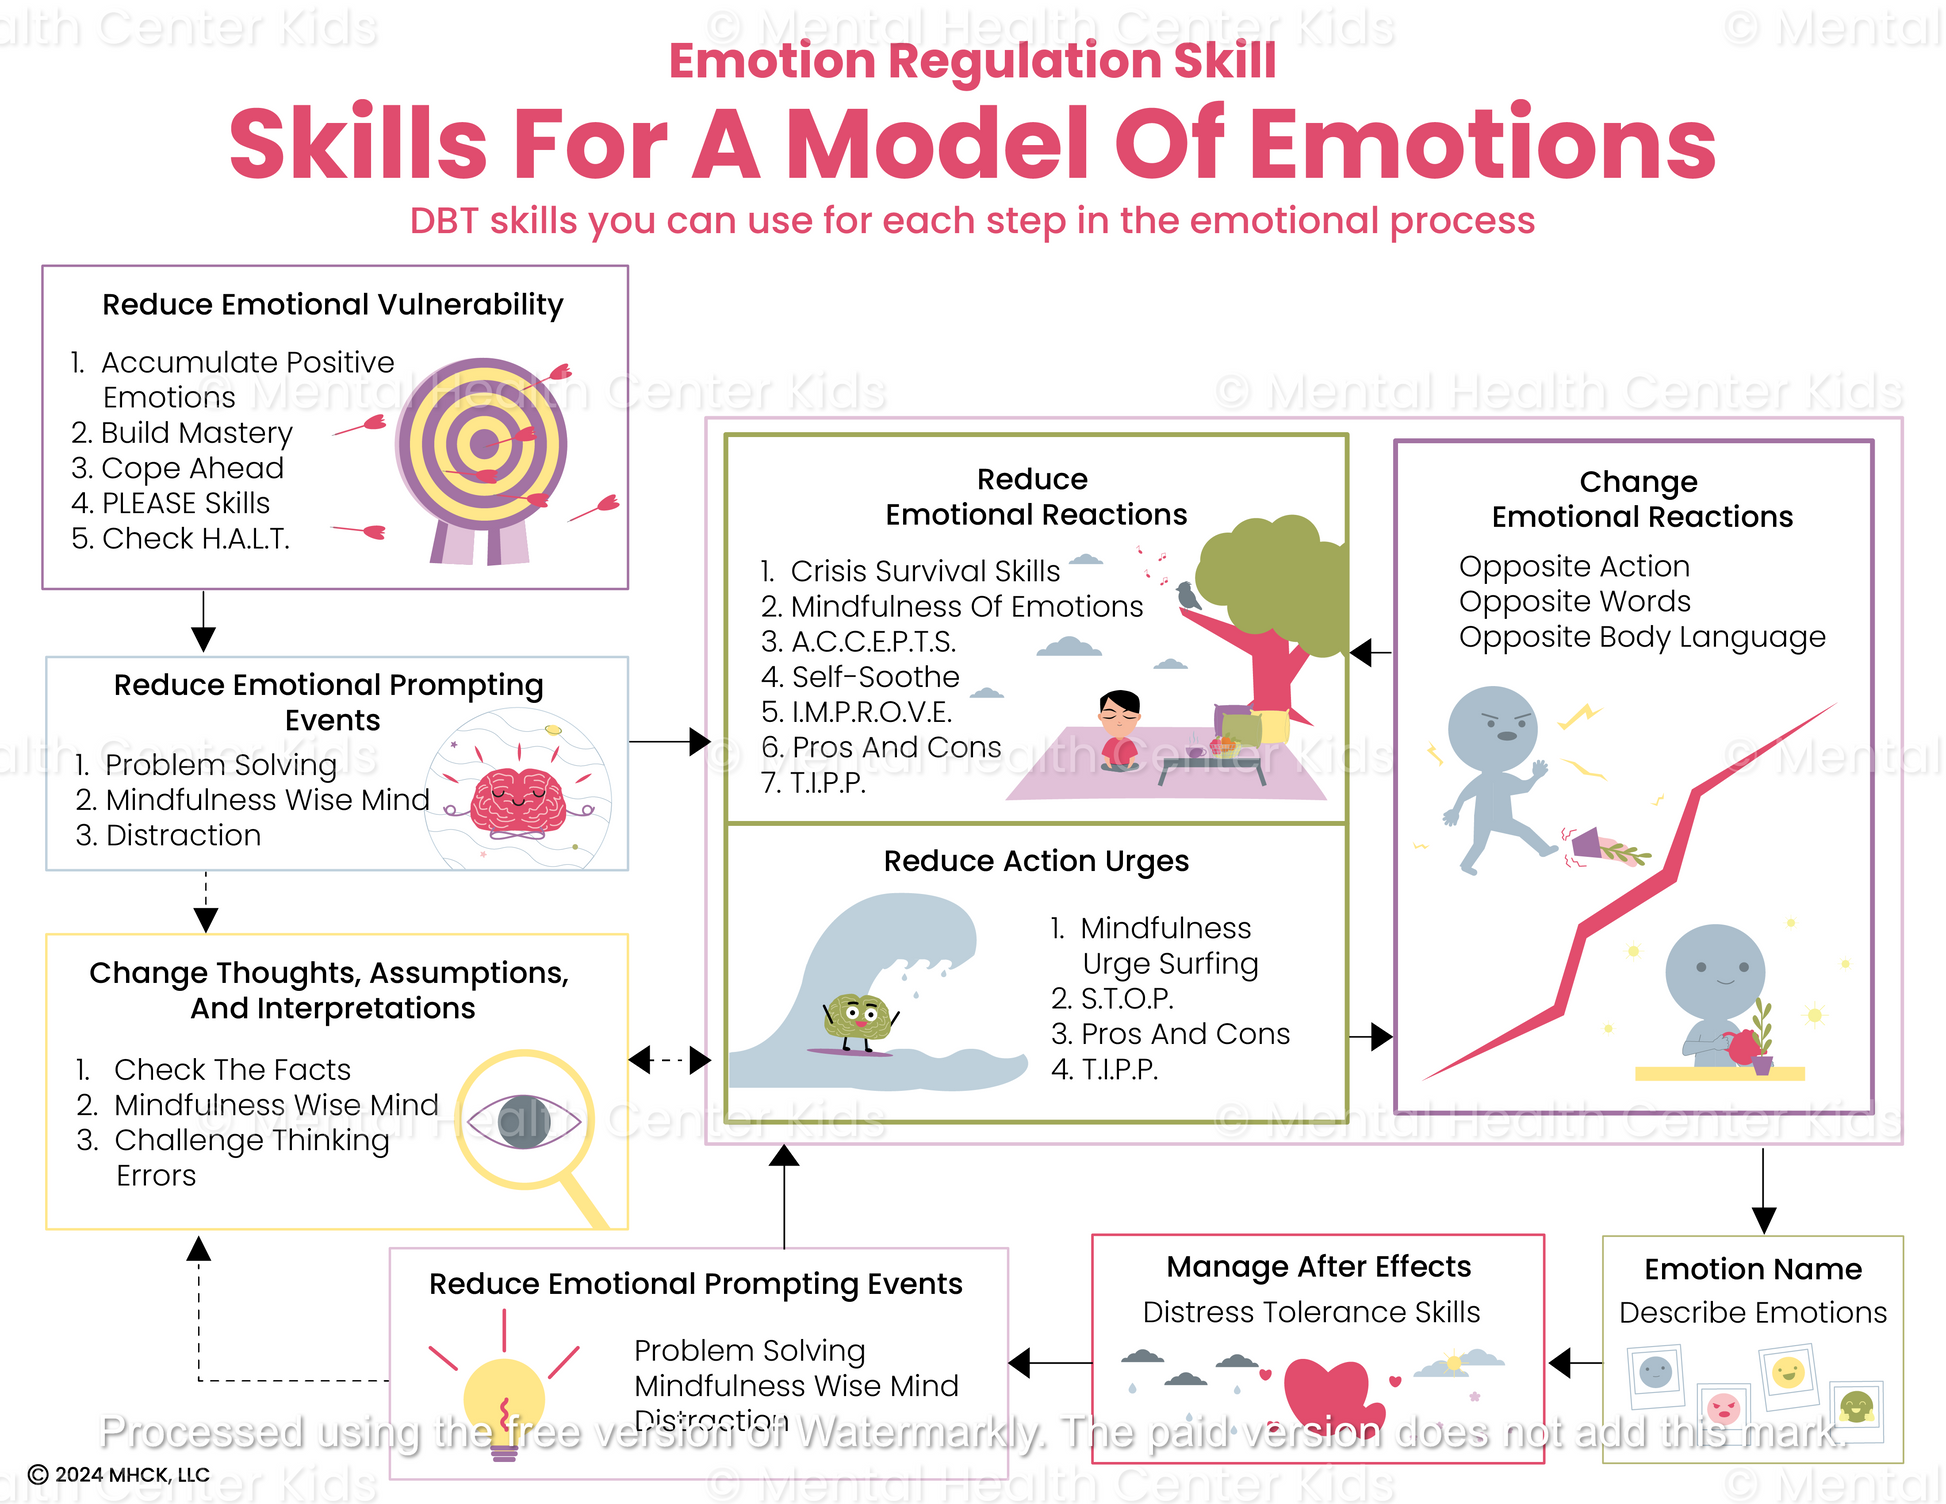 dbt coping skills for a model of emotions 